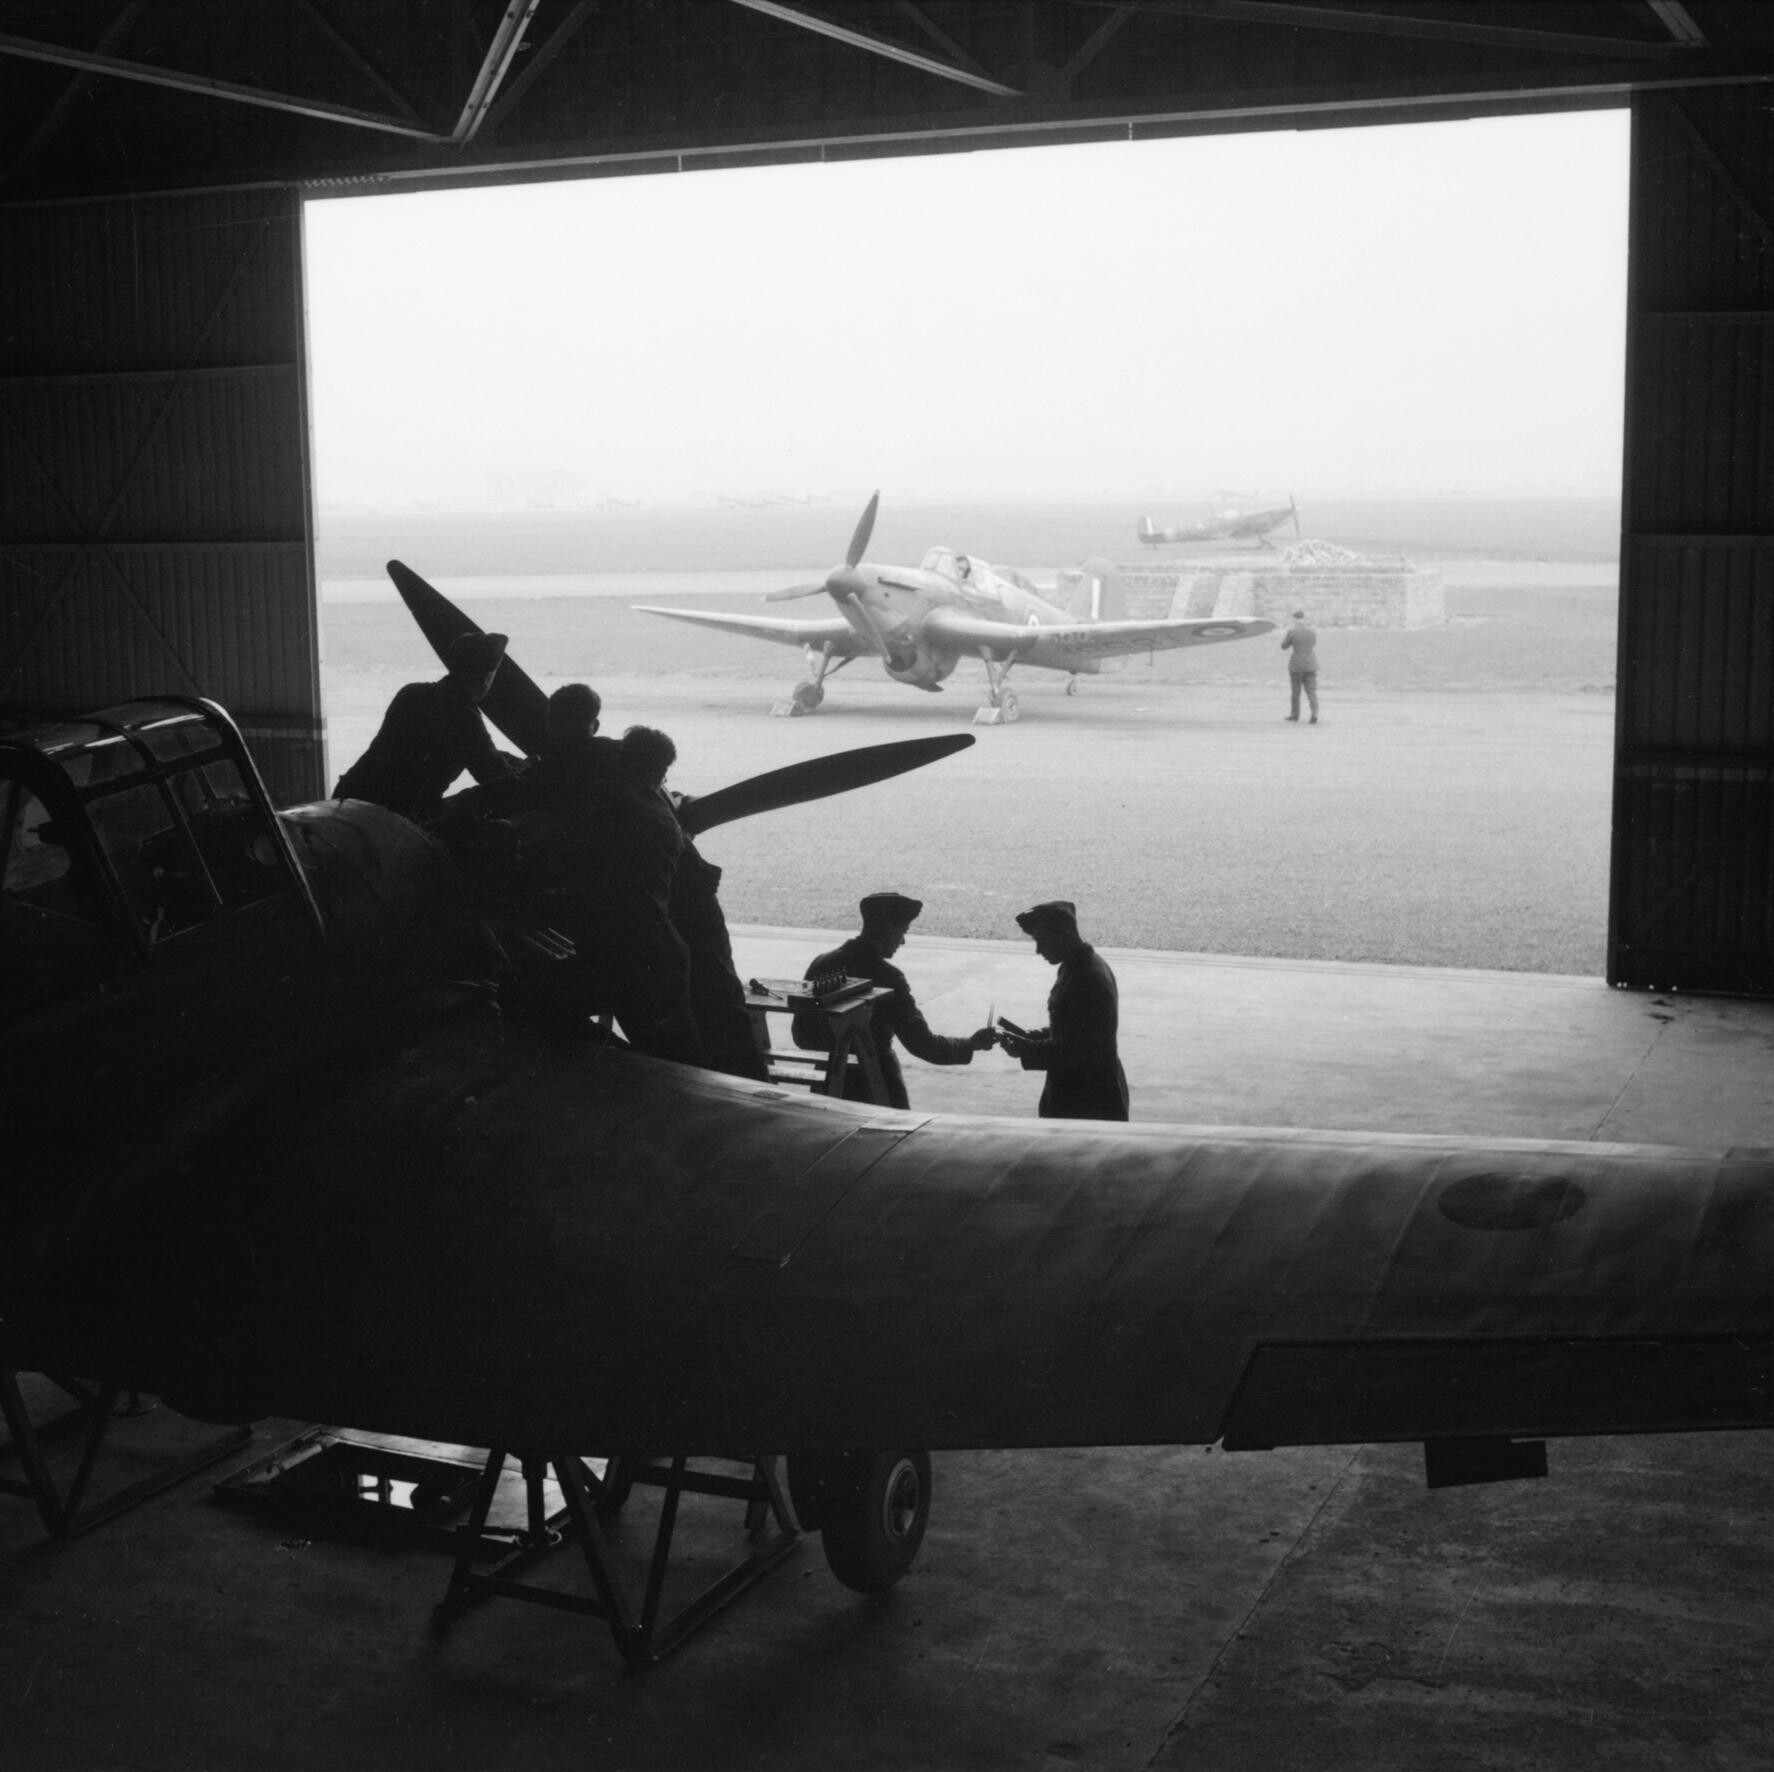 Two Master aircraft and a Spitfire aircraft at RAF Grangemouth, Scotland, United Kingdom, date unknown